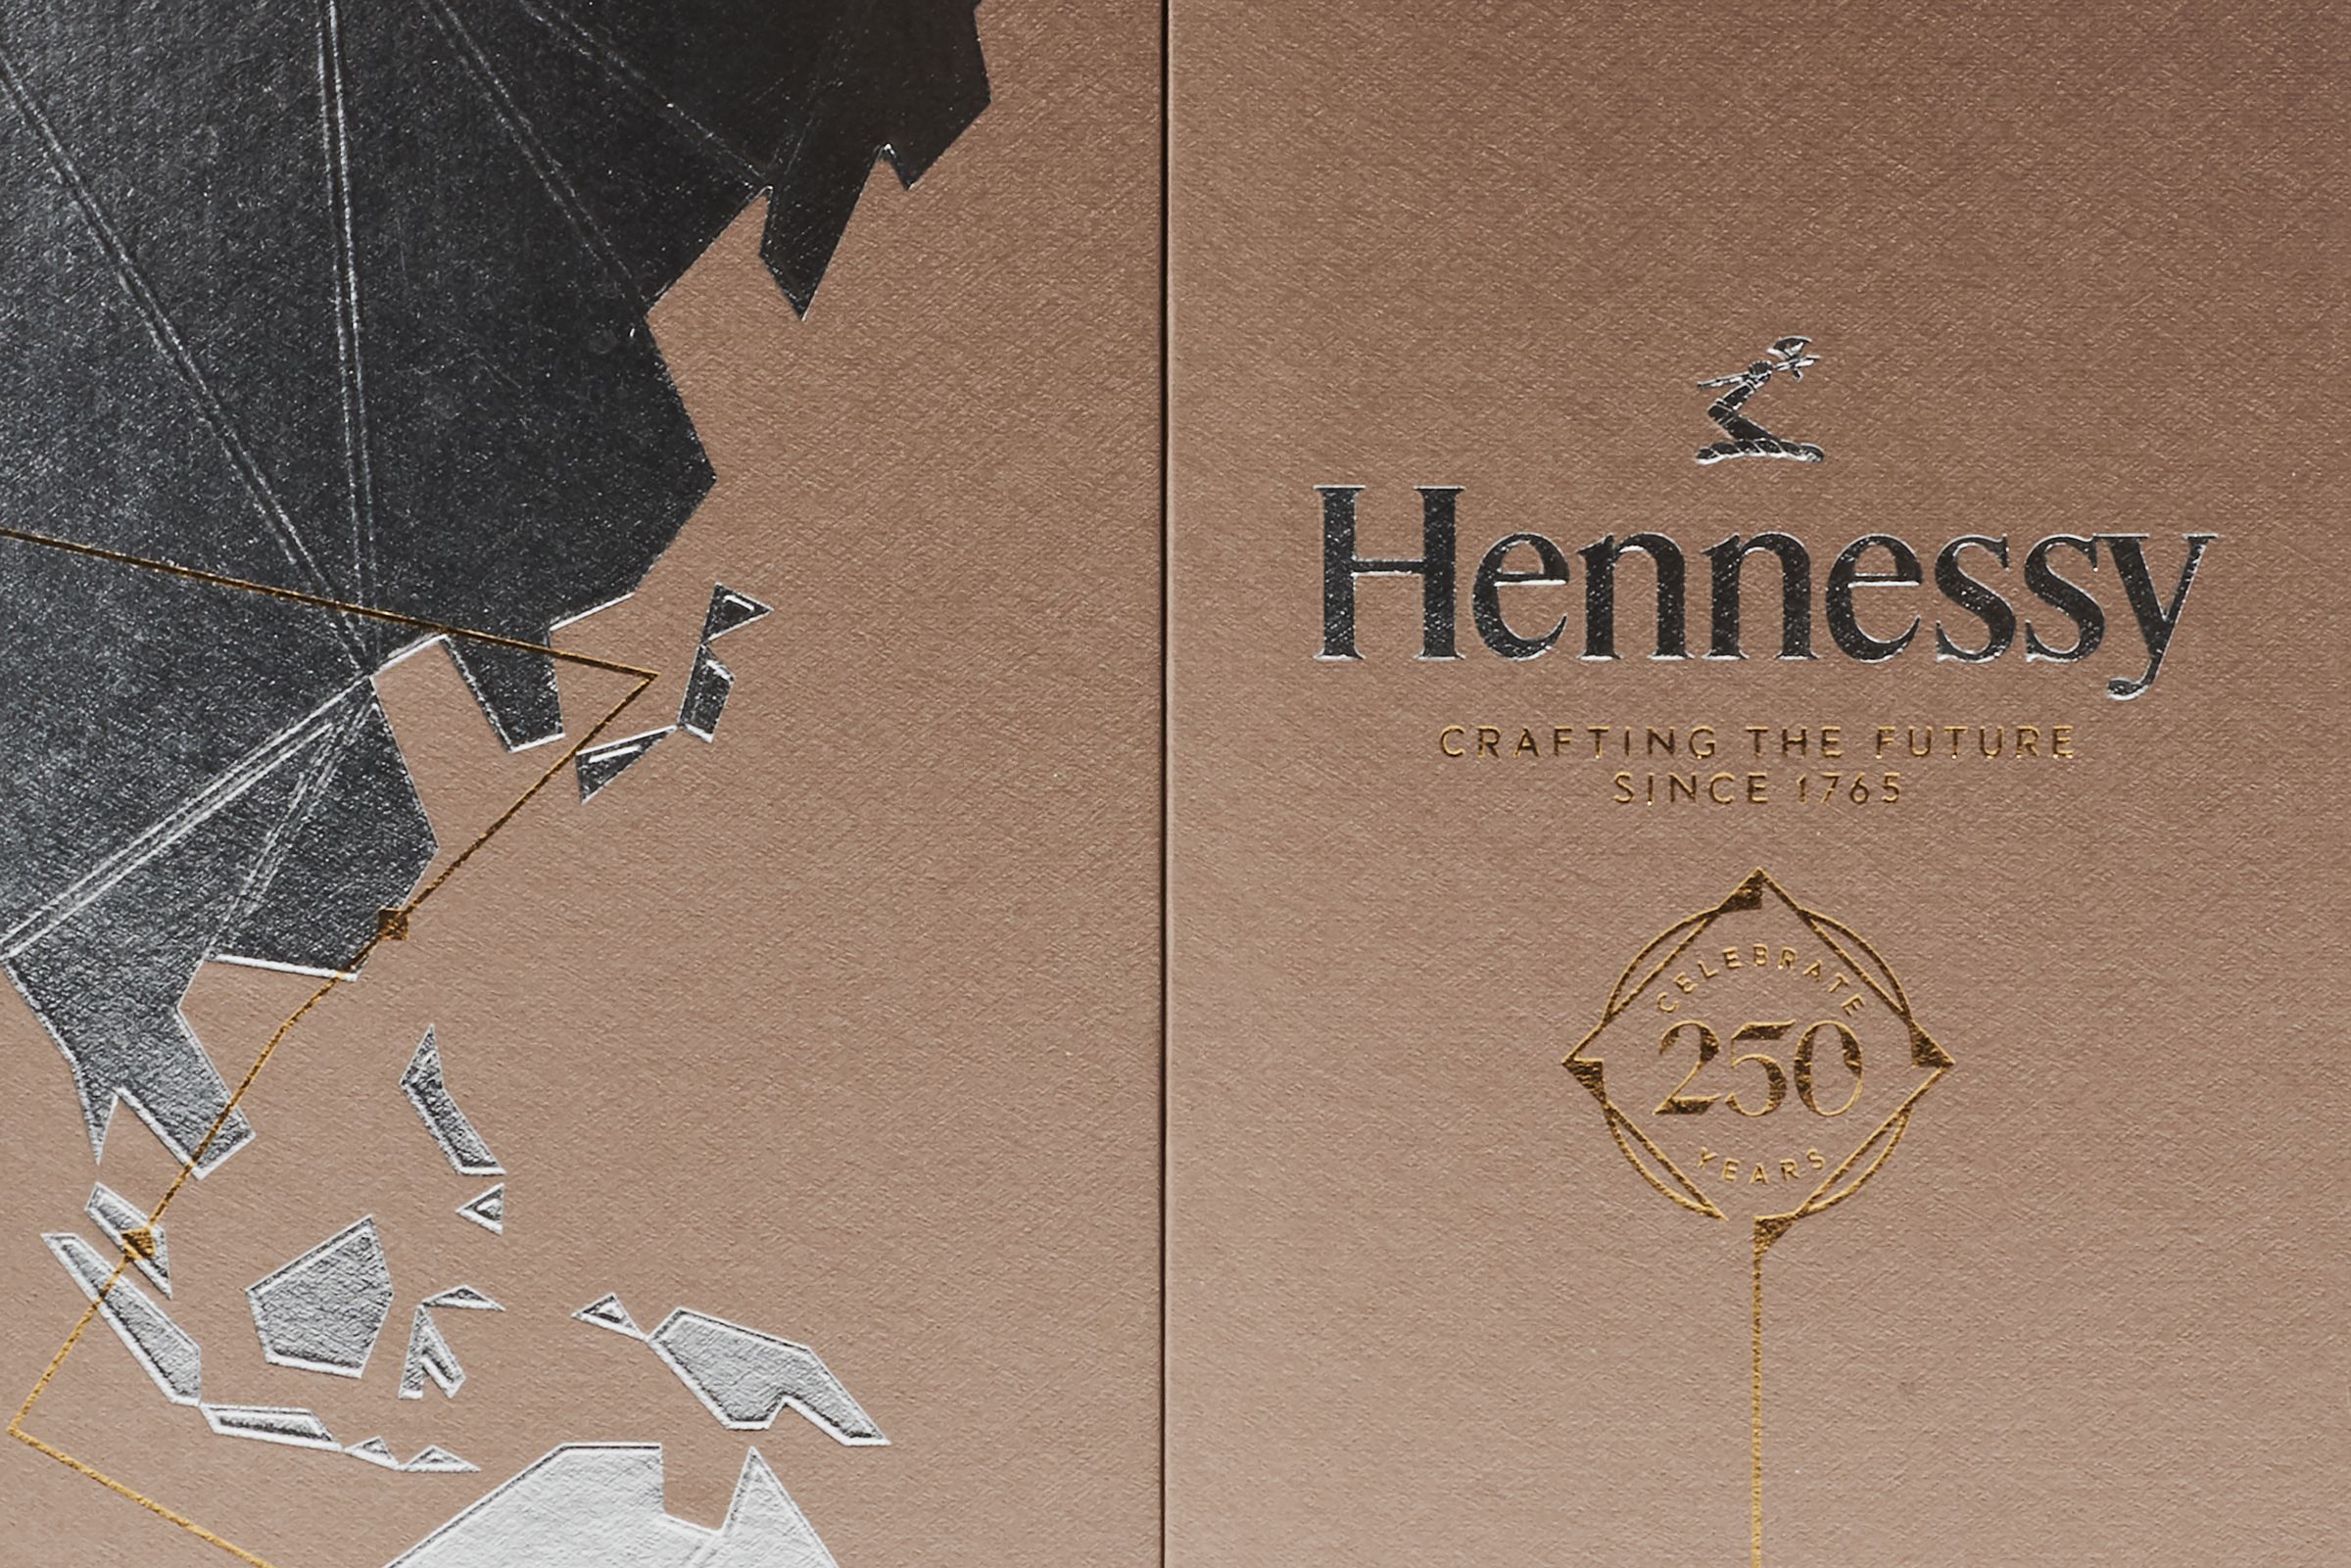 Hennessy 250 anniversary collector's blend box